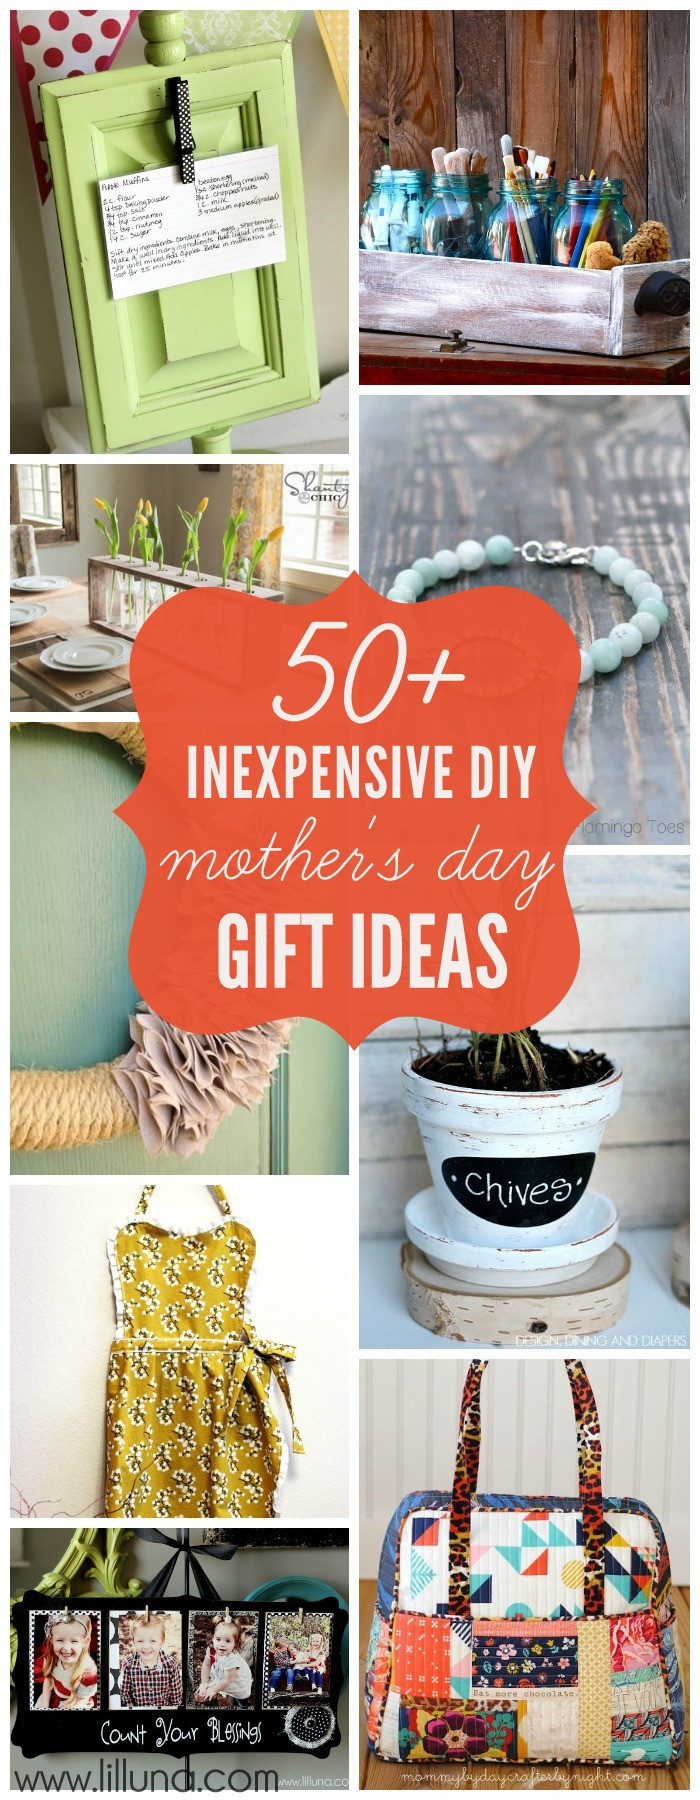 Mothers Day Ideas Gift
 Inexpensive DIY Mother s Day Gift Ideas